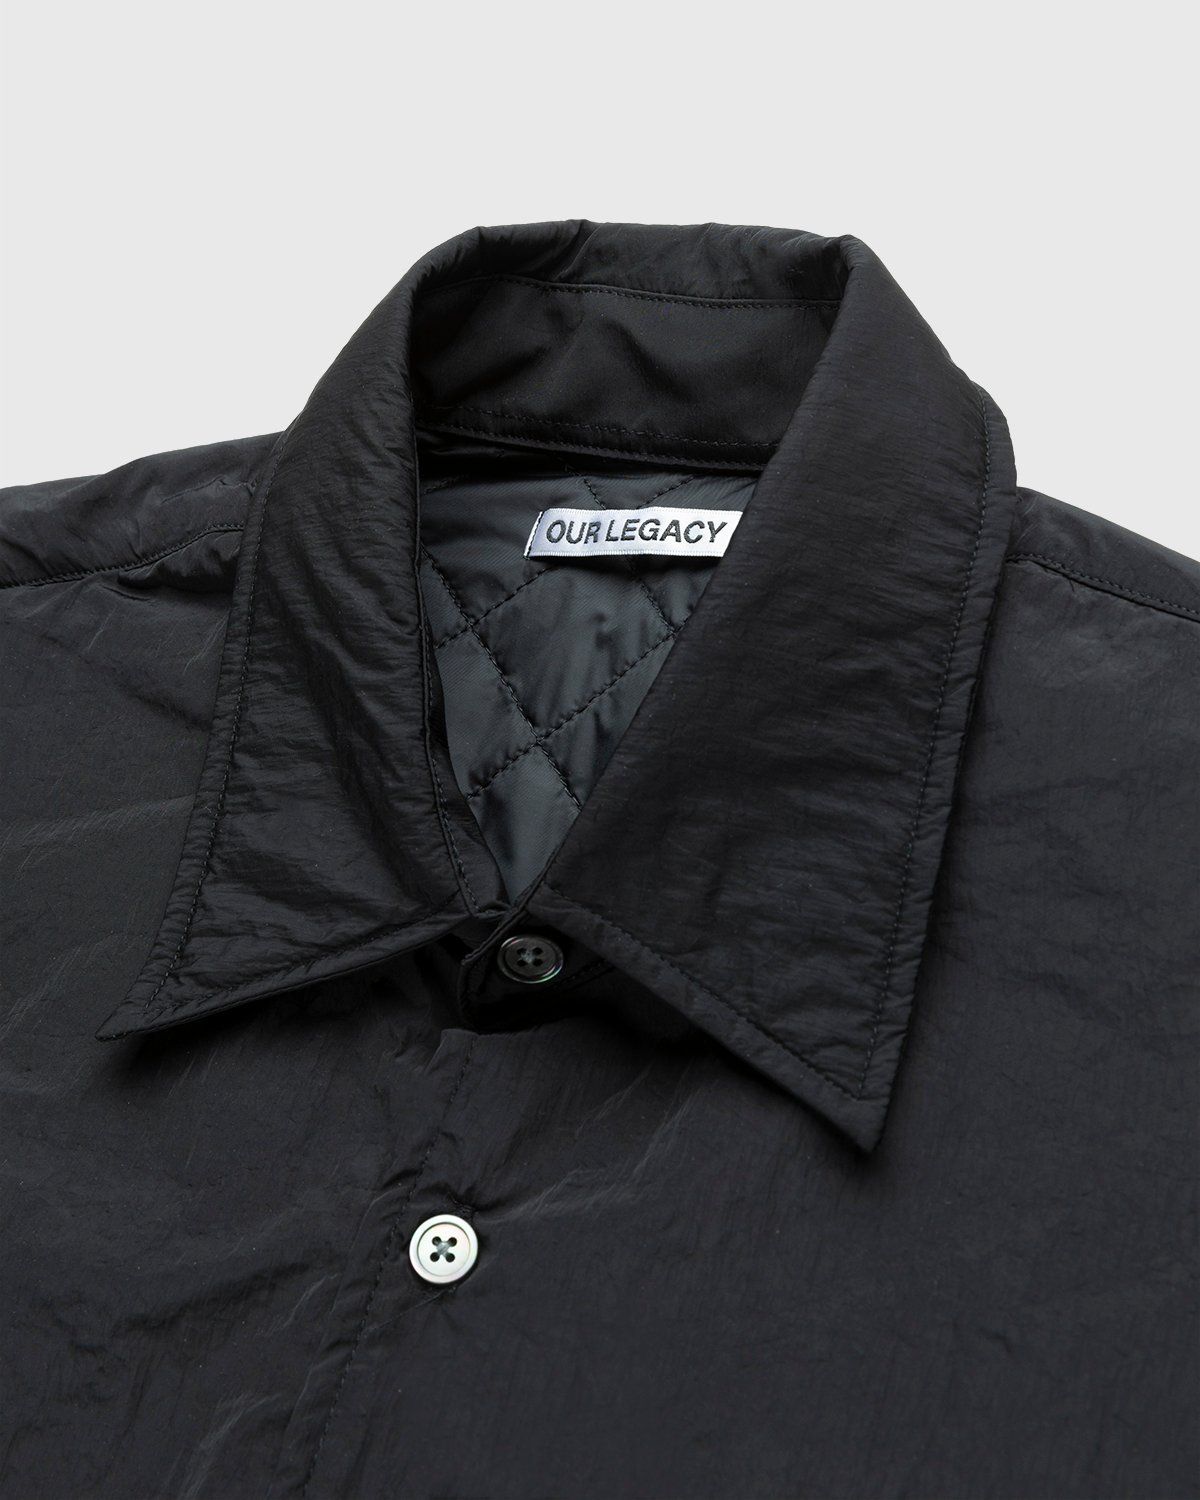 Our Legacy – Tech Borrowed Jacket Padded Black - Outerwear - Black - Image 4